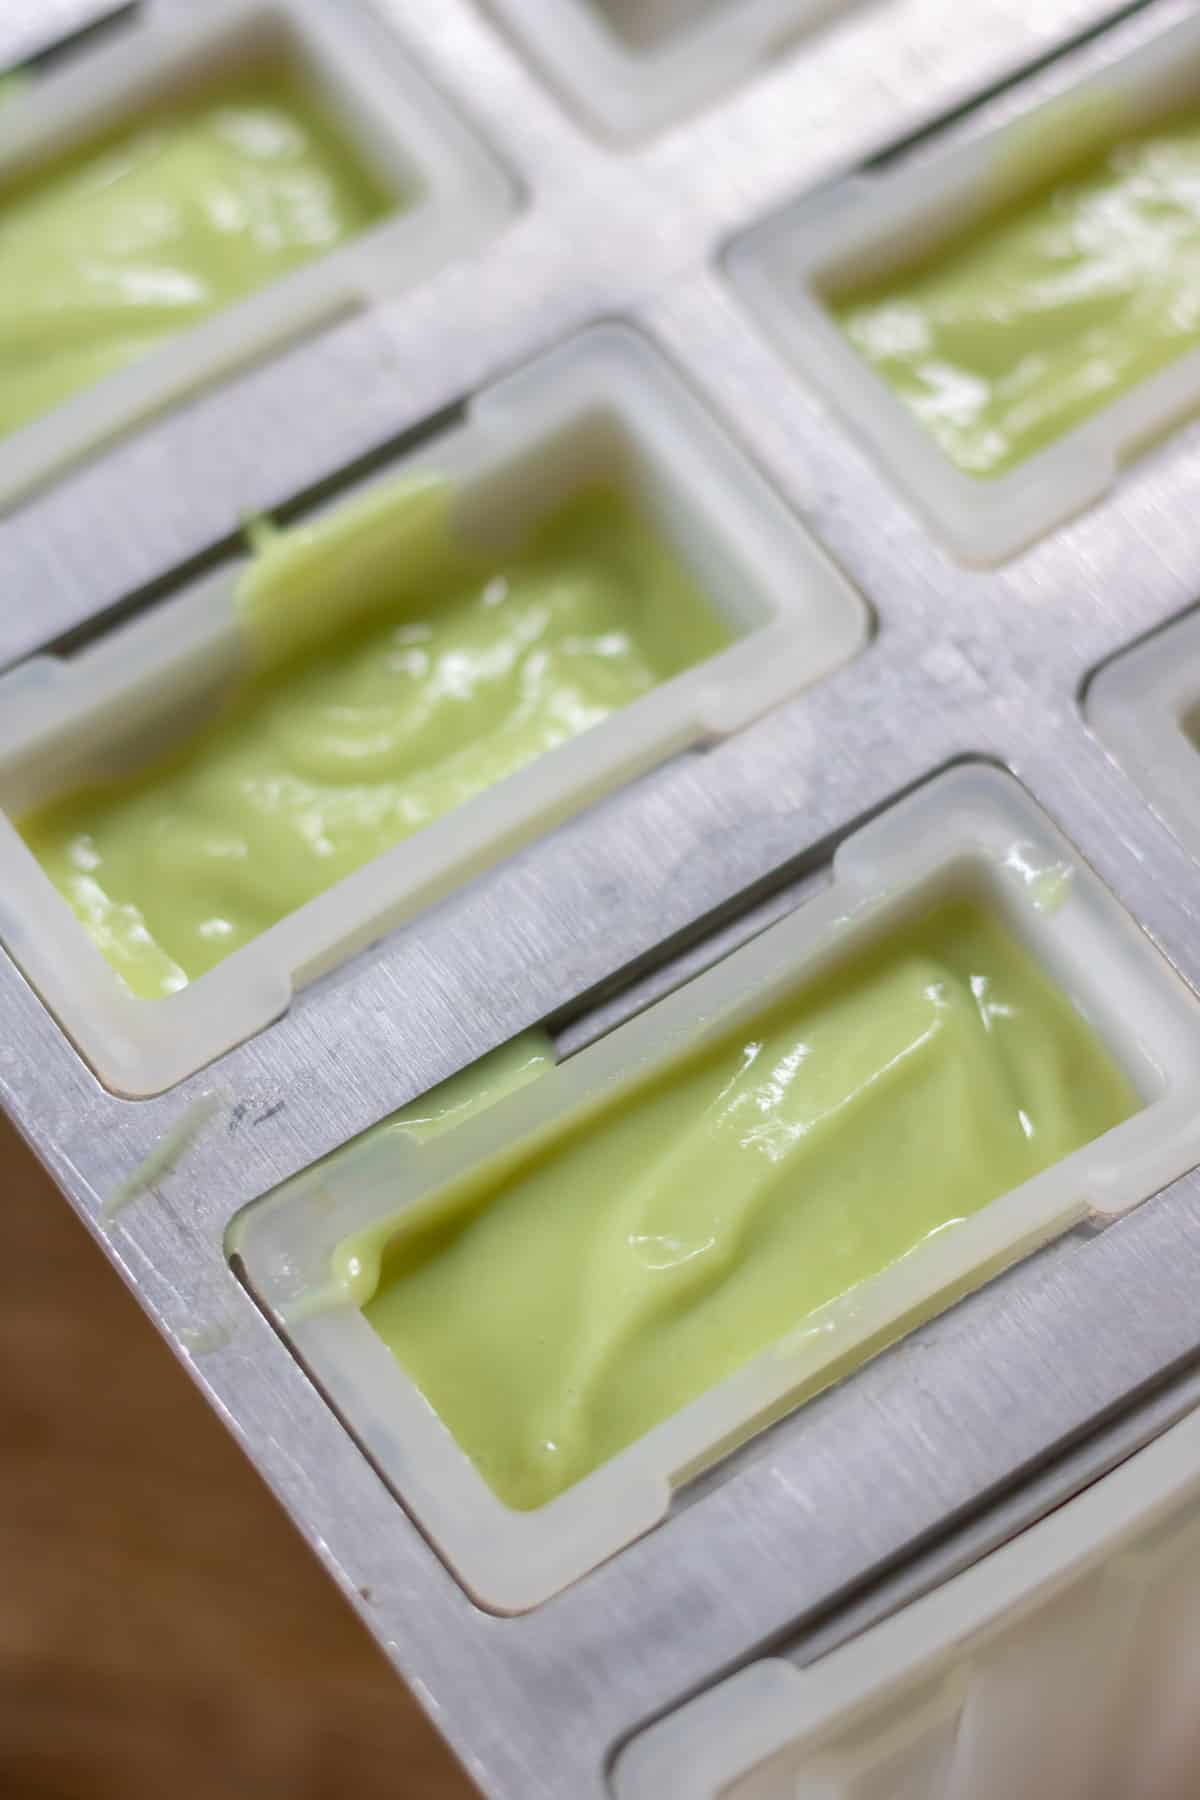 Mixture in popsicle molds.